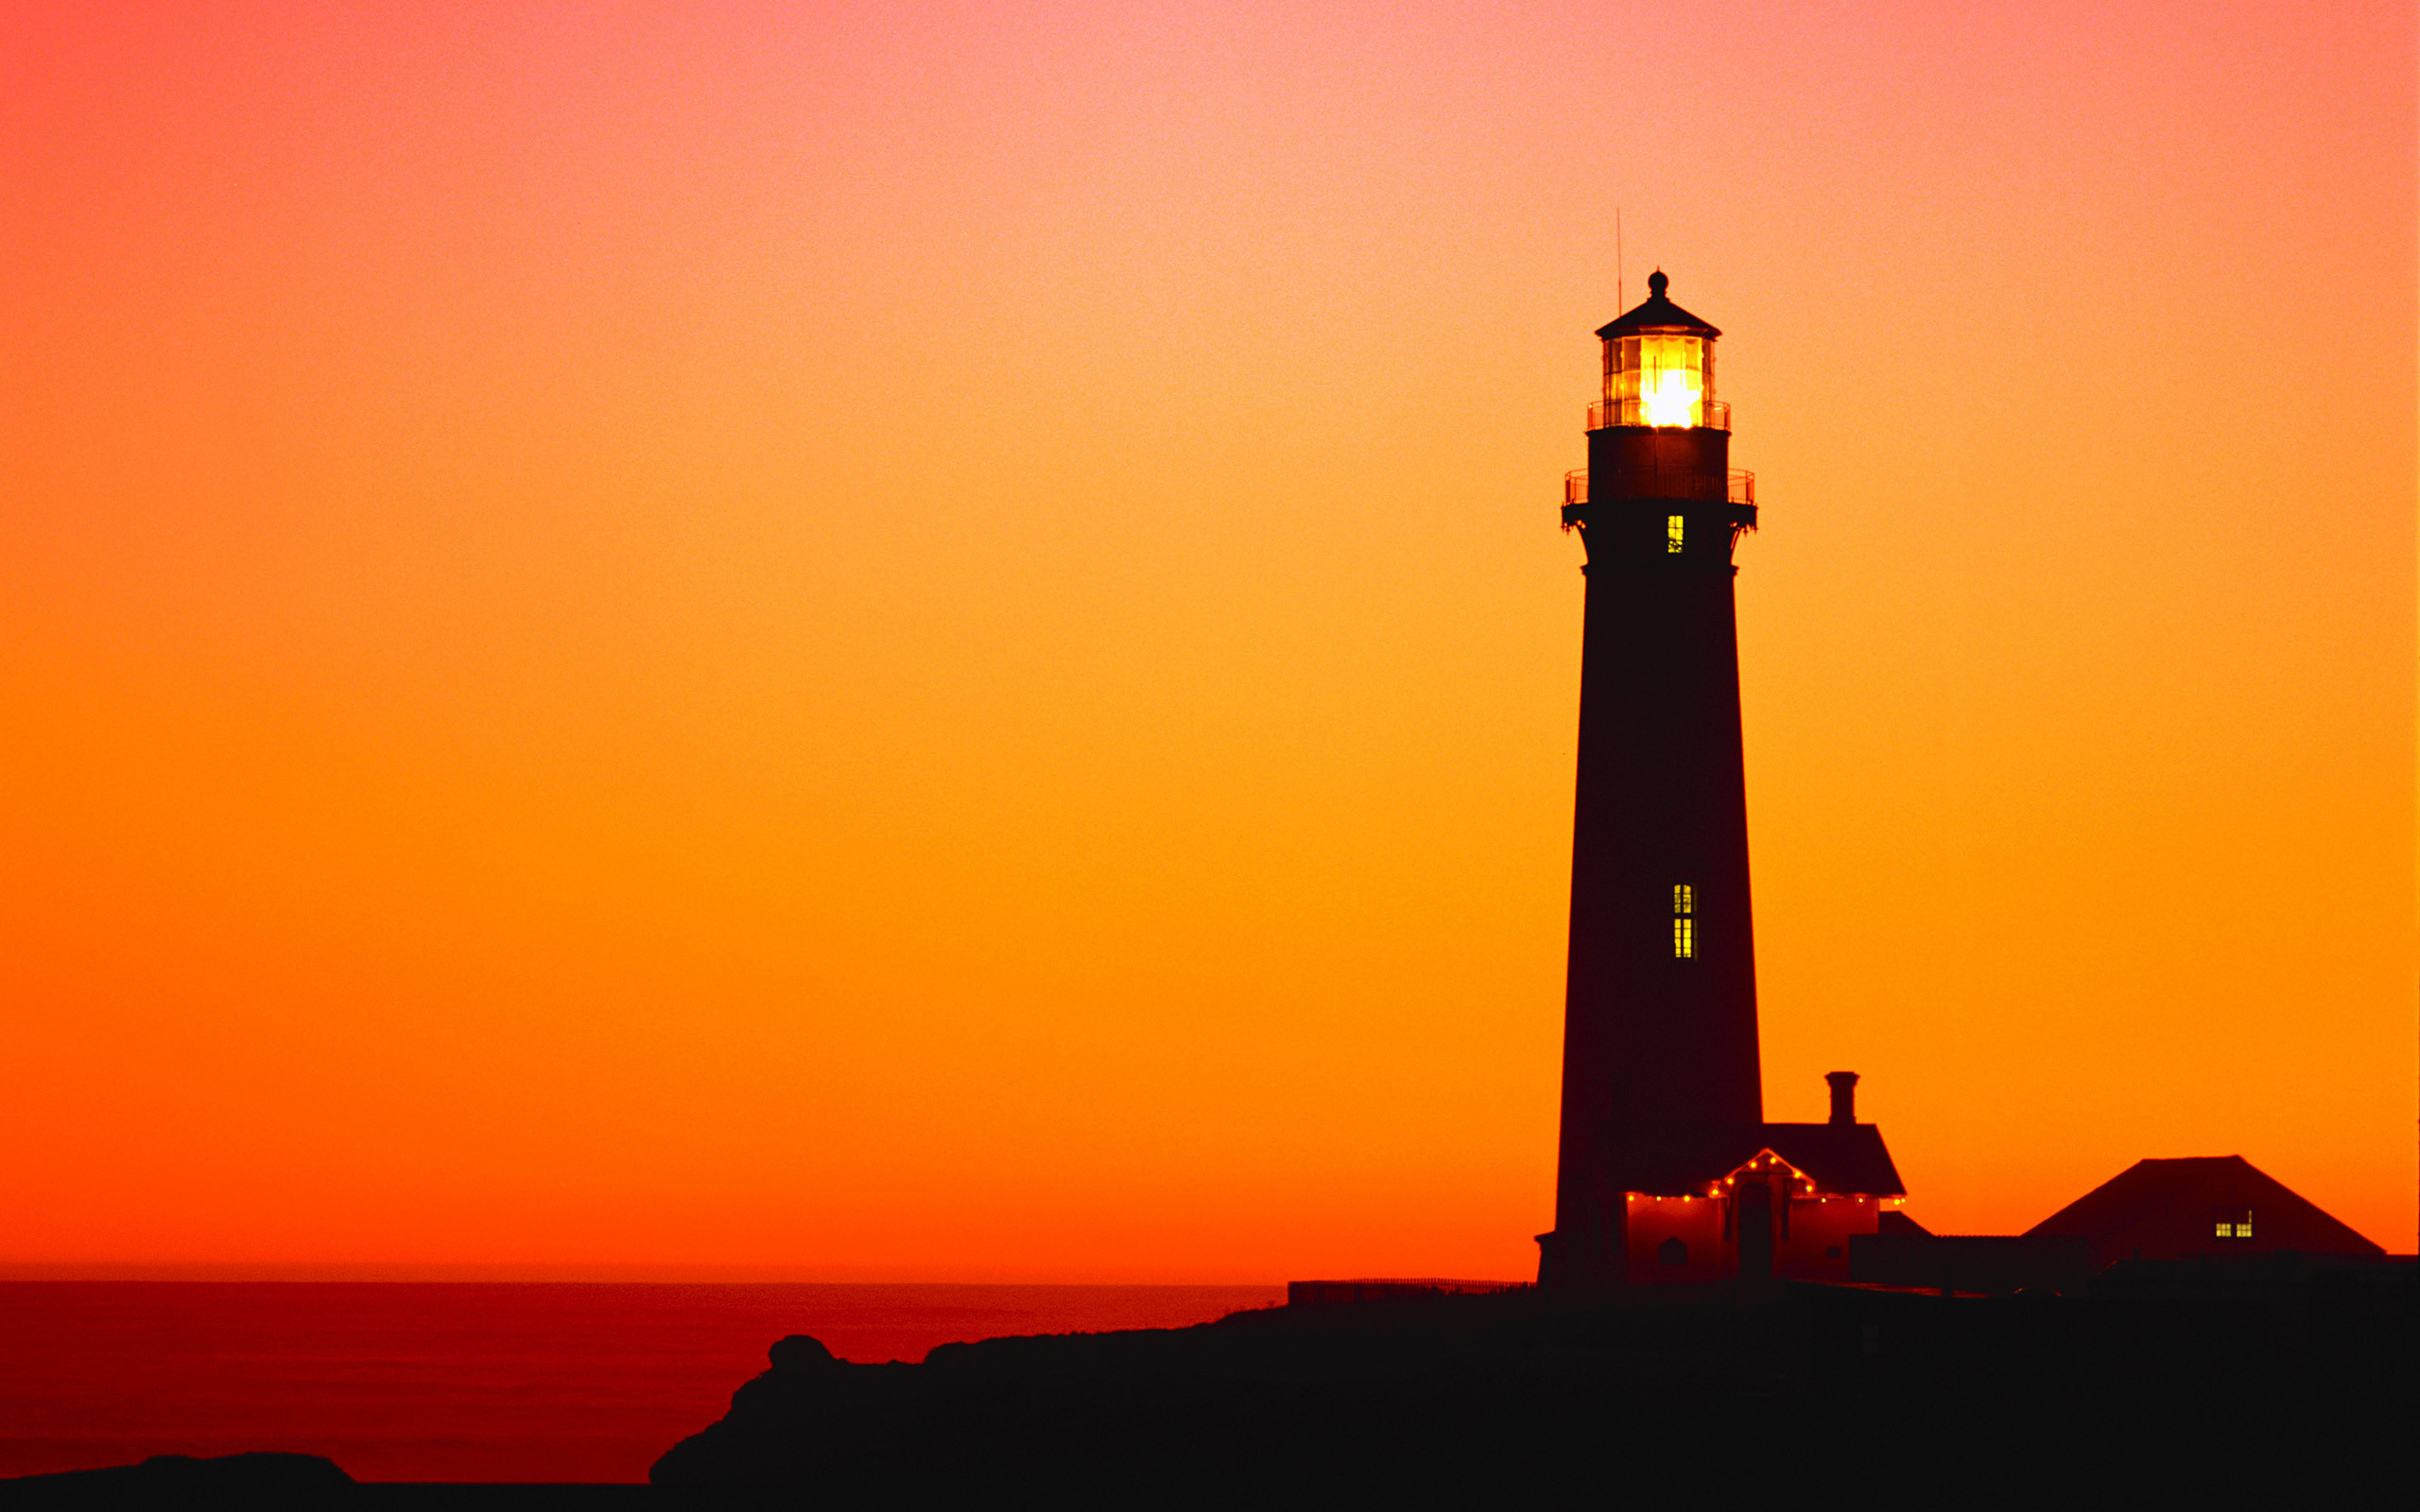 2560x1600 wallpaper.wiki-Lighthouse-Pictures-Download-Free-PIC-WPE007285